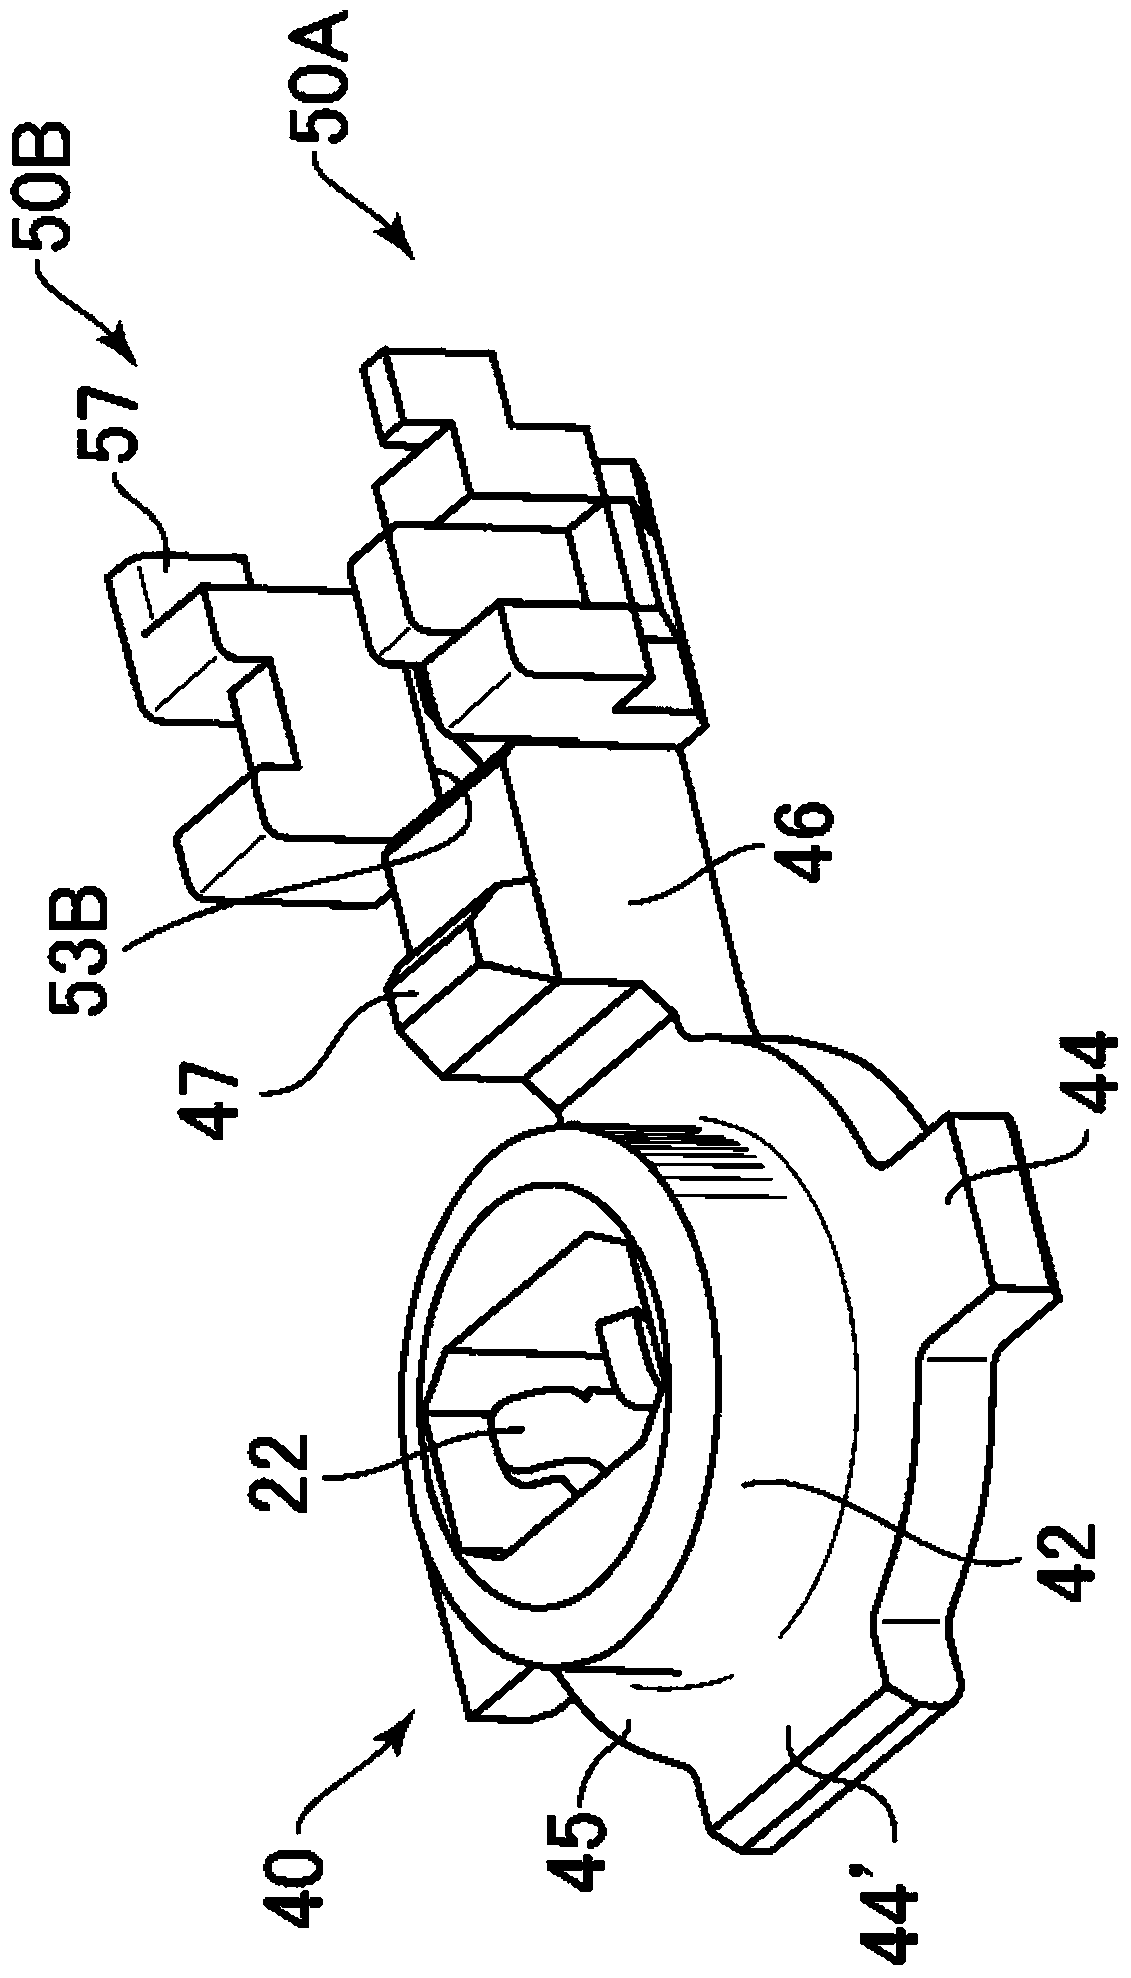 Coaxial Cable Connectors with Improved Crimp Strength and Impedance Performance